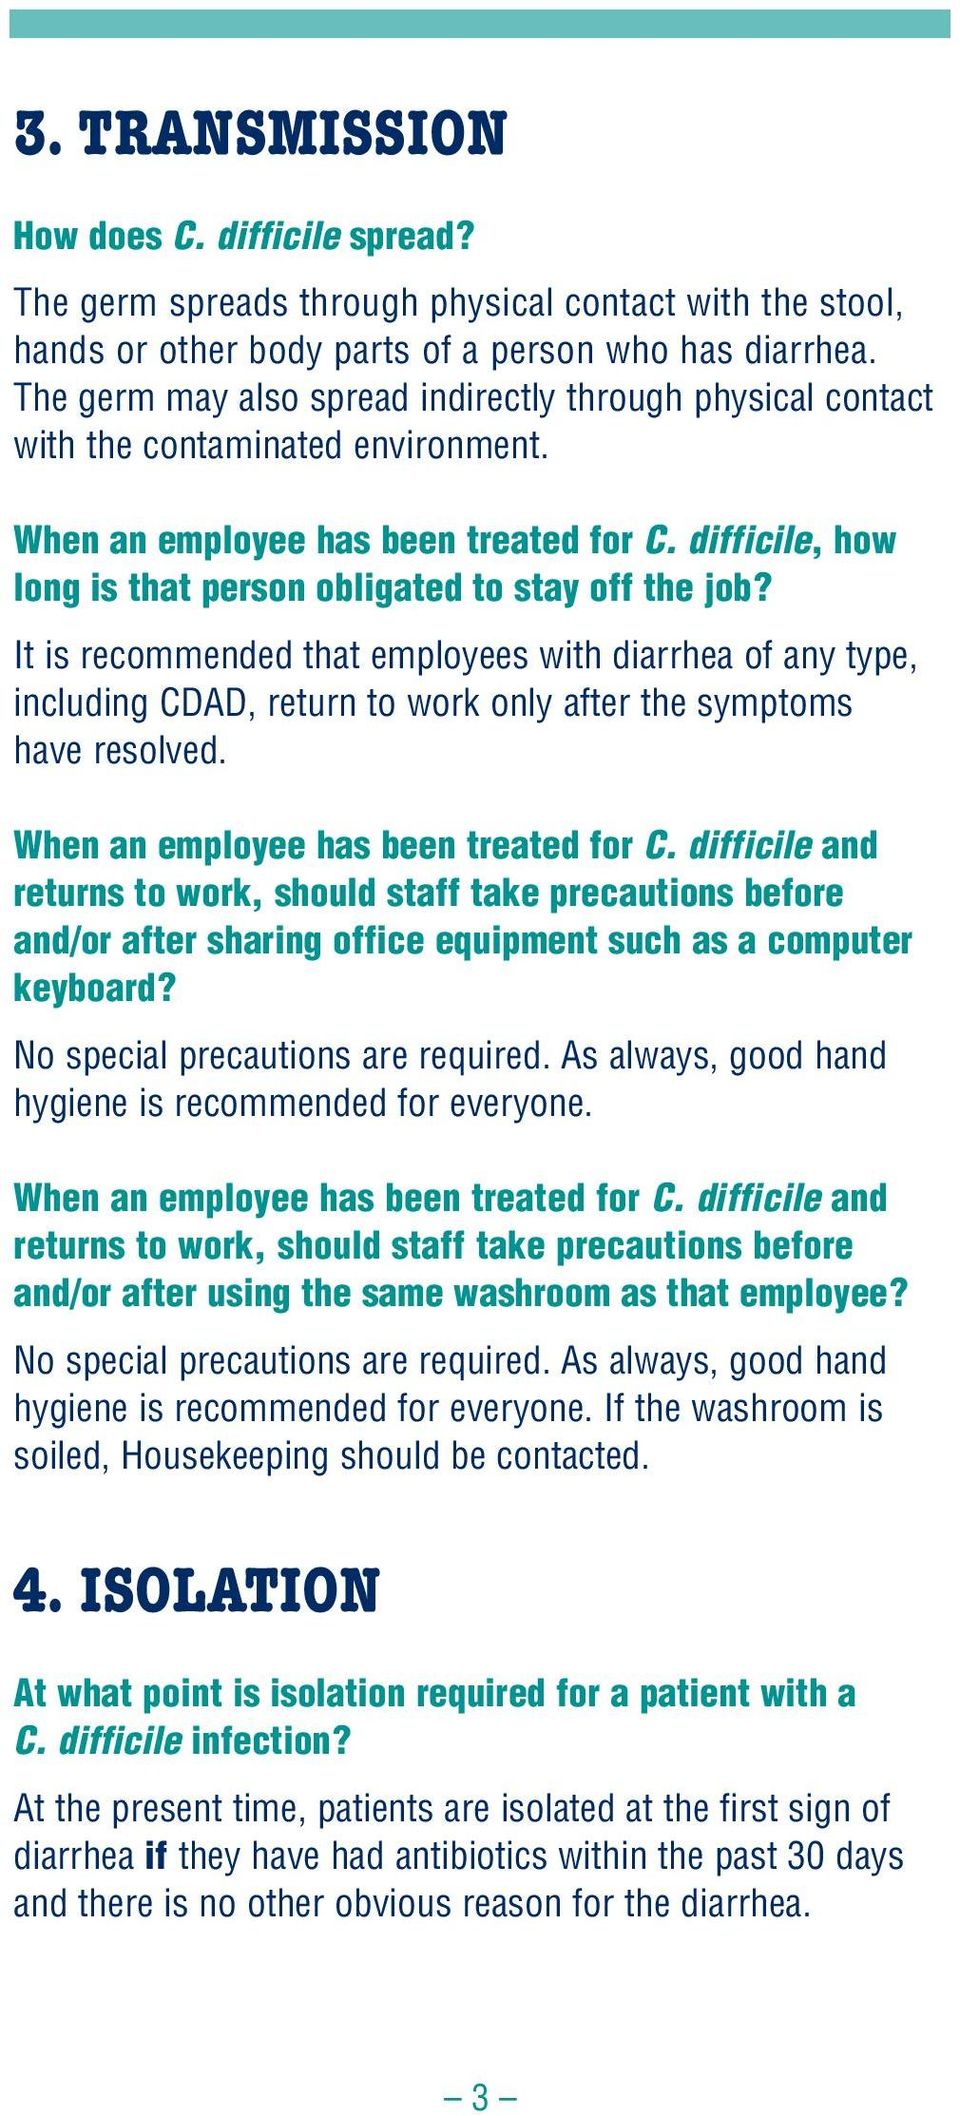 difficile, how long is that person obligated to stay off the job? It is recommended that employees with diarrhea of any type, including CDAD, return to work only after the symptoms have resolved.